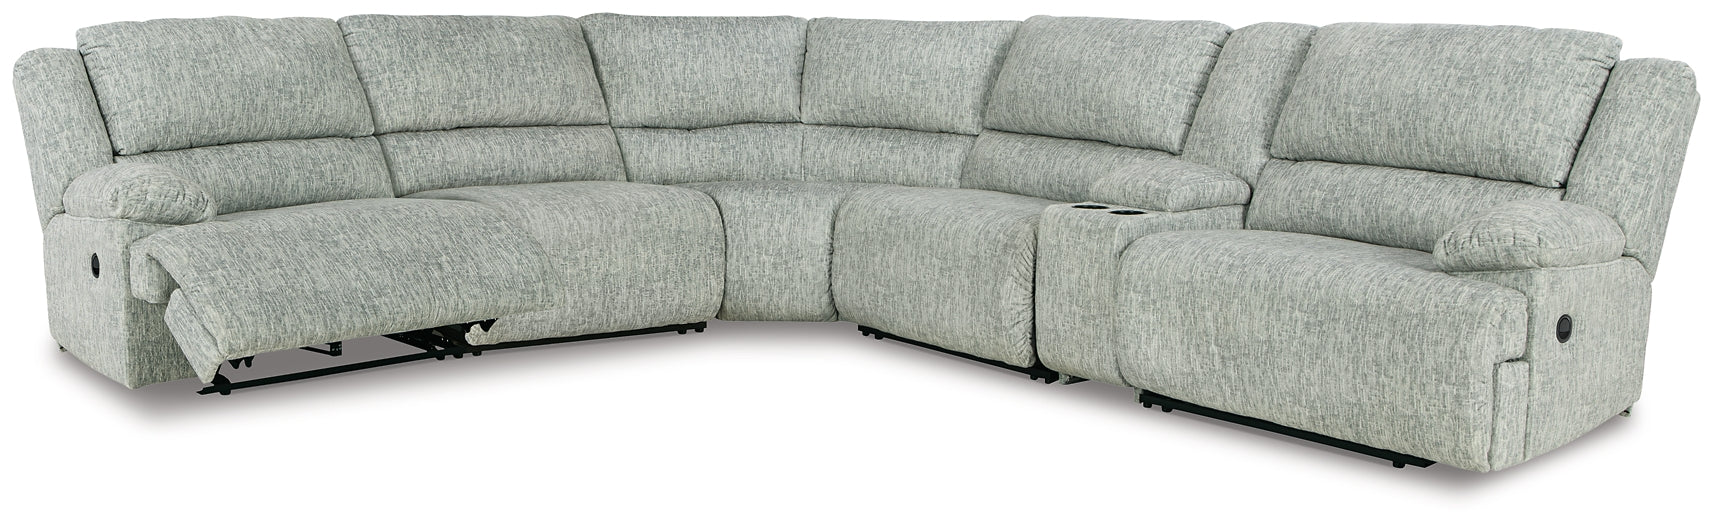 McClelland 6-Piece Reclining Sectional Rent Wise Rent To Own Jacksonville, Florida